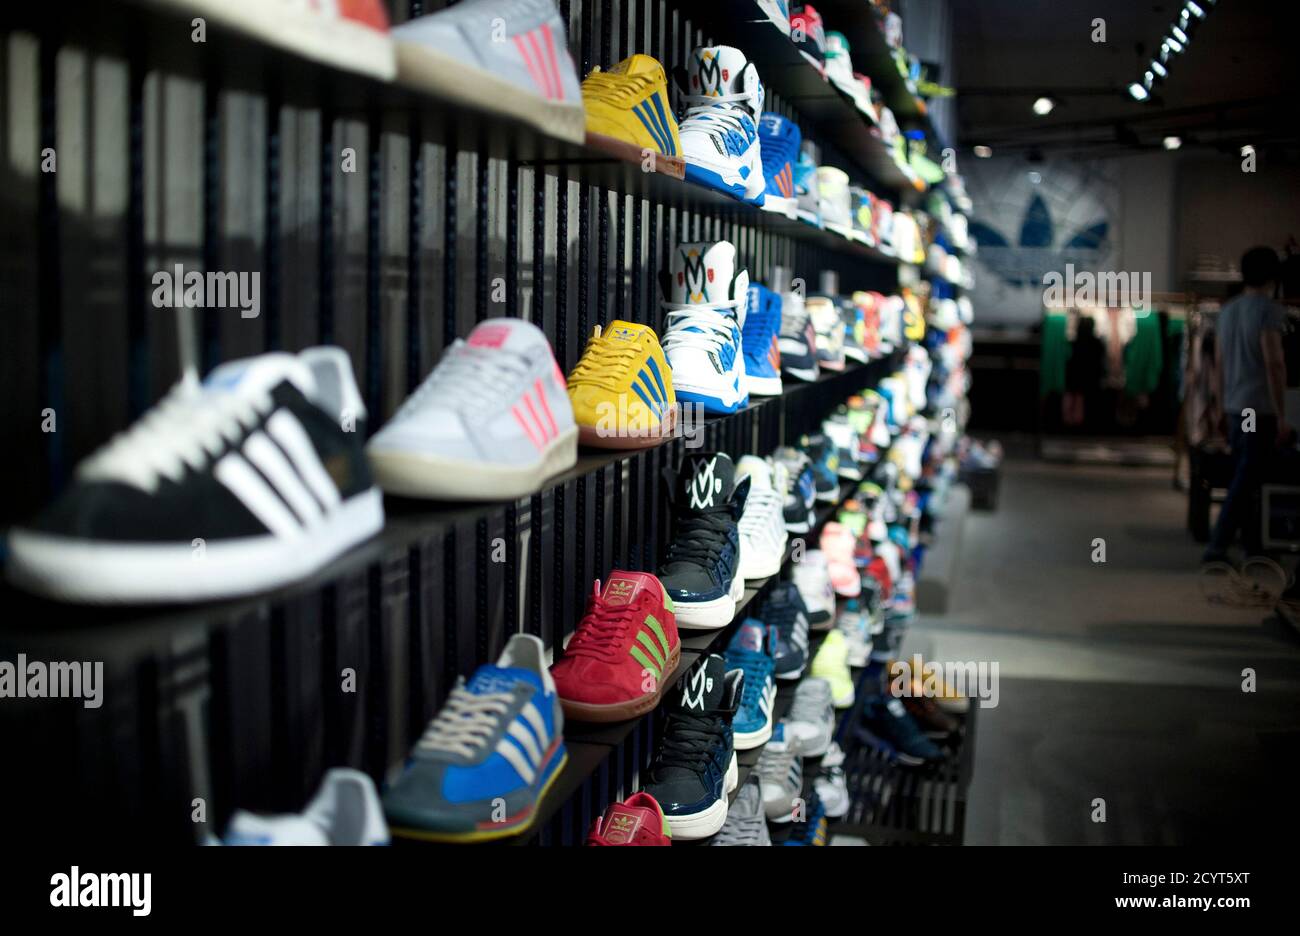 Adidas Original shoes are pictured before the opening at the new Adidas  Originals store in Berlin, March 27, 2014. Adidas has launched a new store  blueprint for its Originals fashion brand with